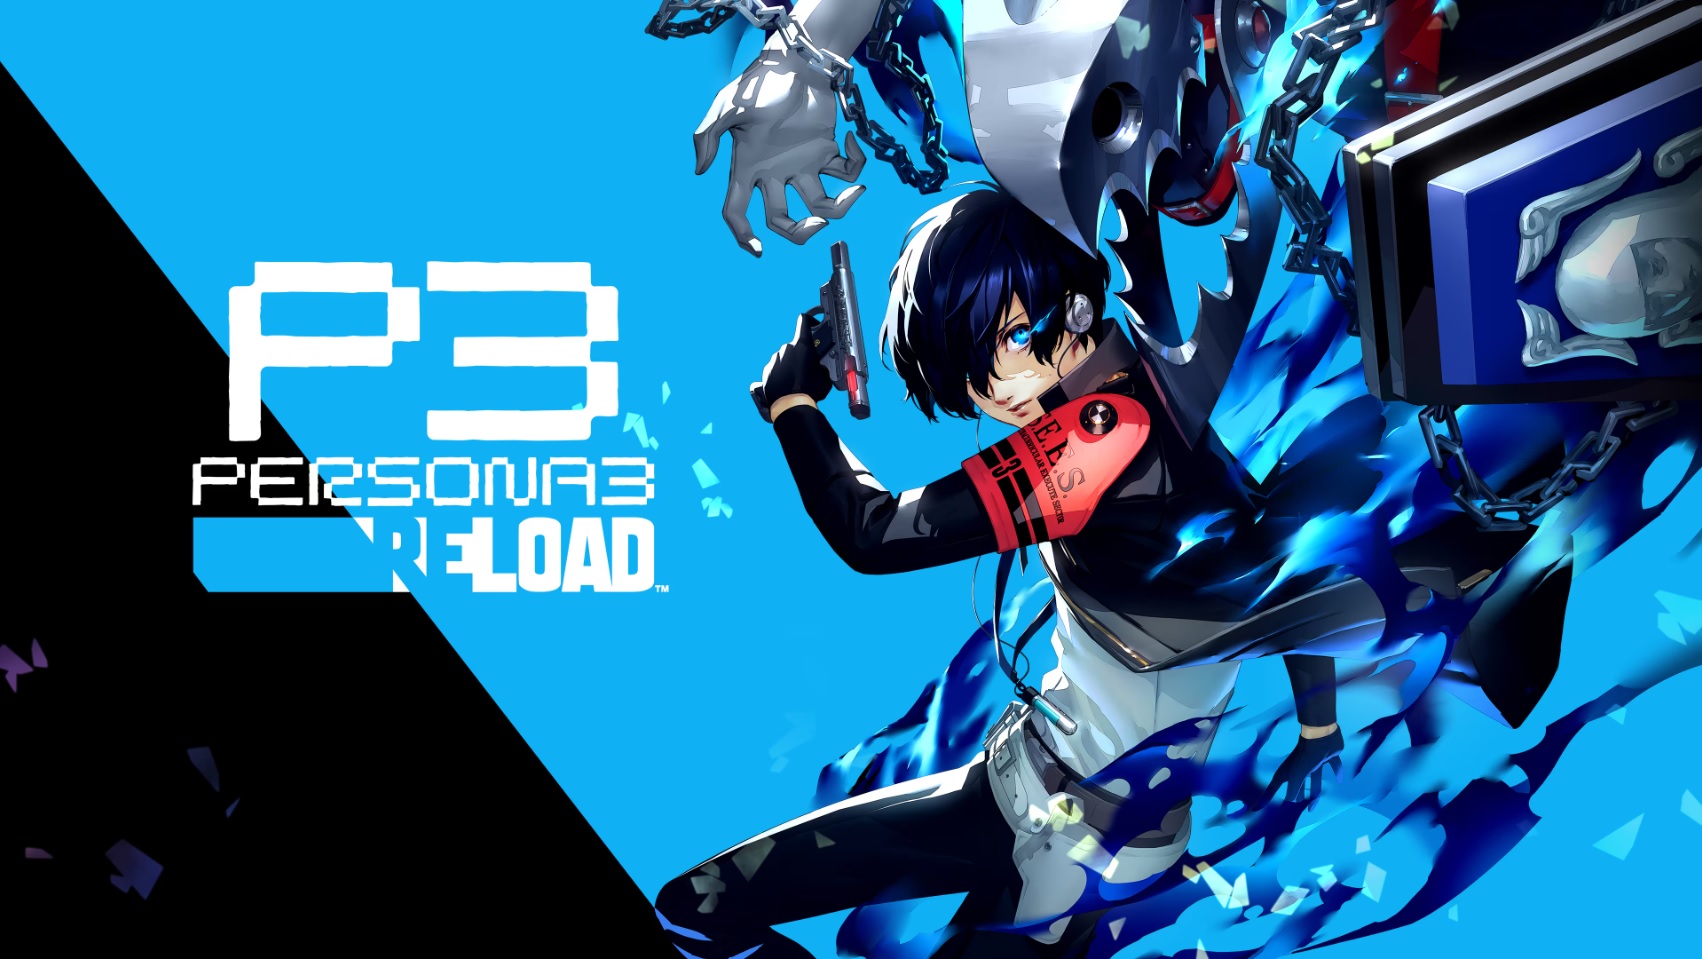 Persona 3 Reload remakes the fan-favorite RPG by way of Persona 5